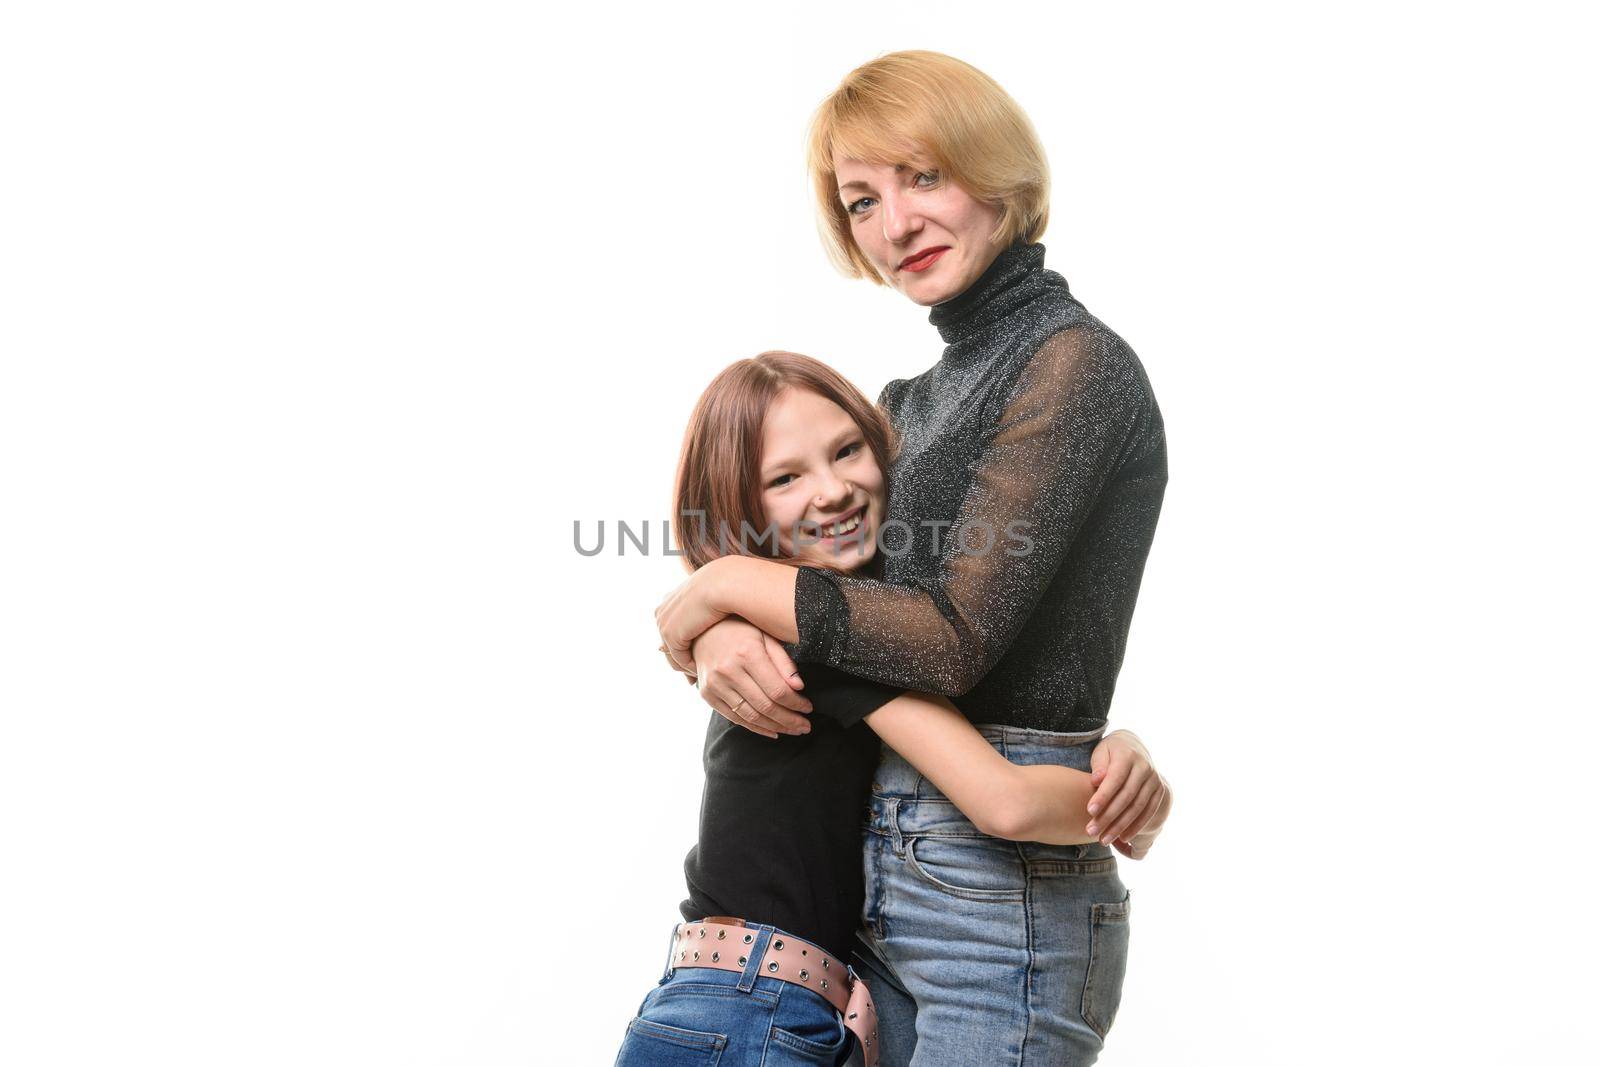 Happy daughter hugs her mother, both look joyfully into the frame, close-up portrait by Madhourse